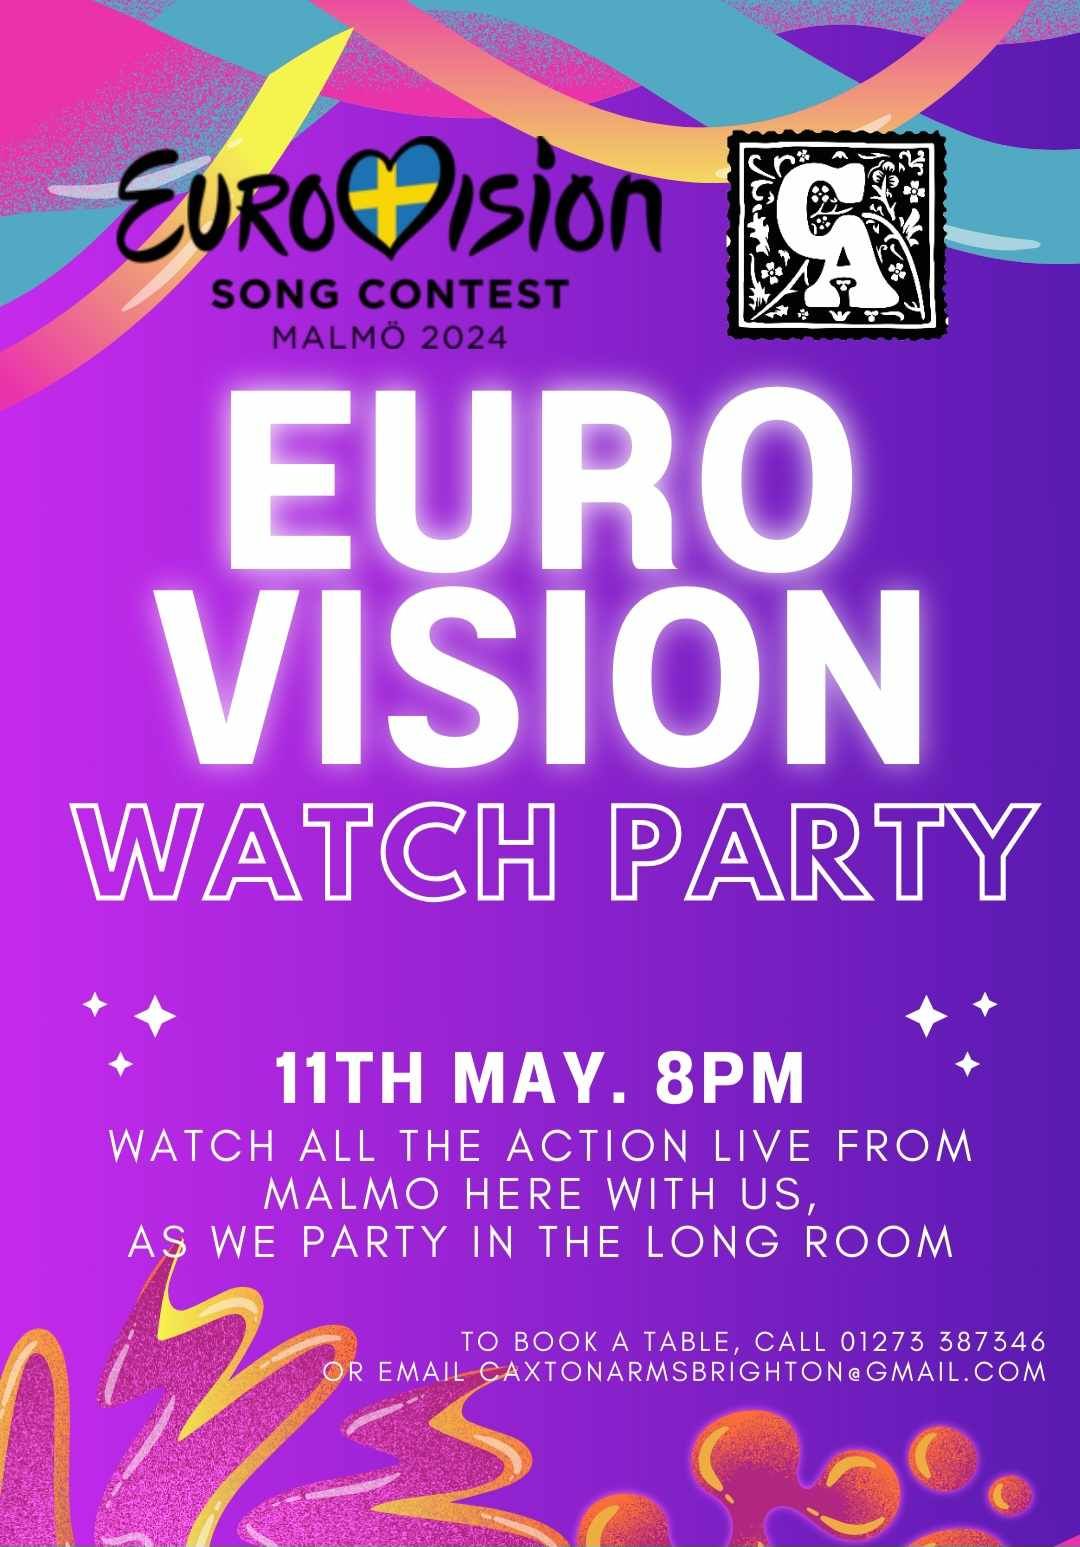 EUROVISION WATCH PARTY